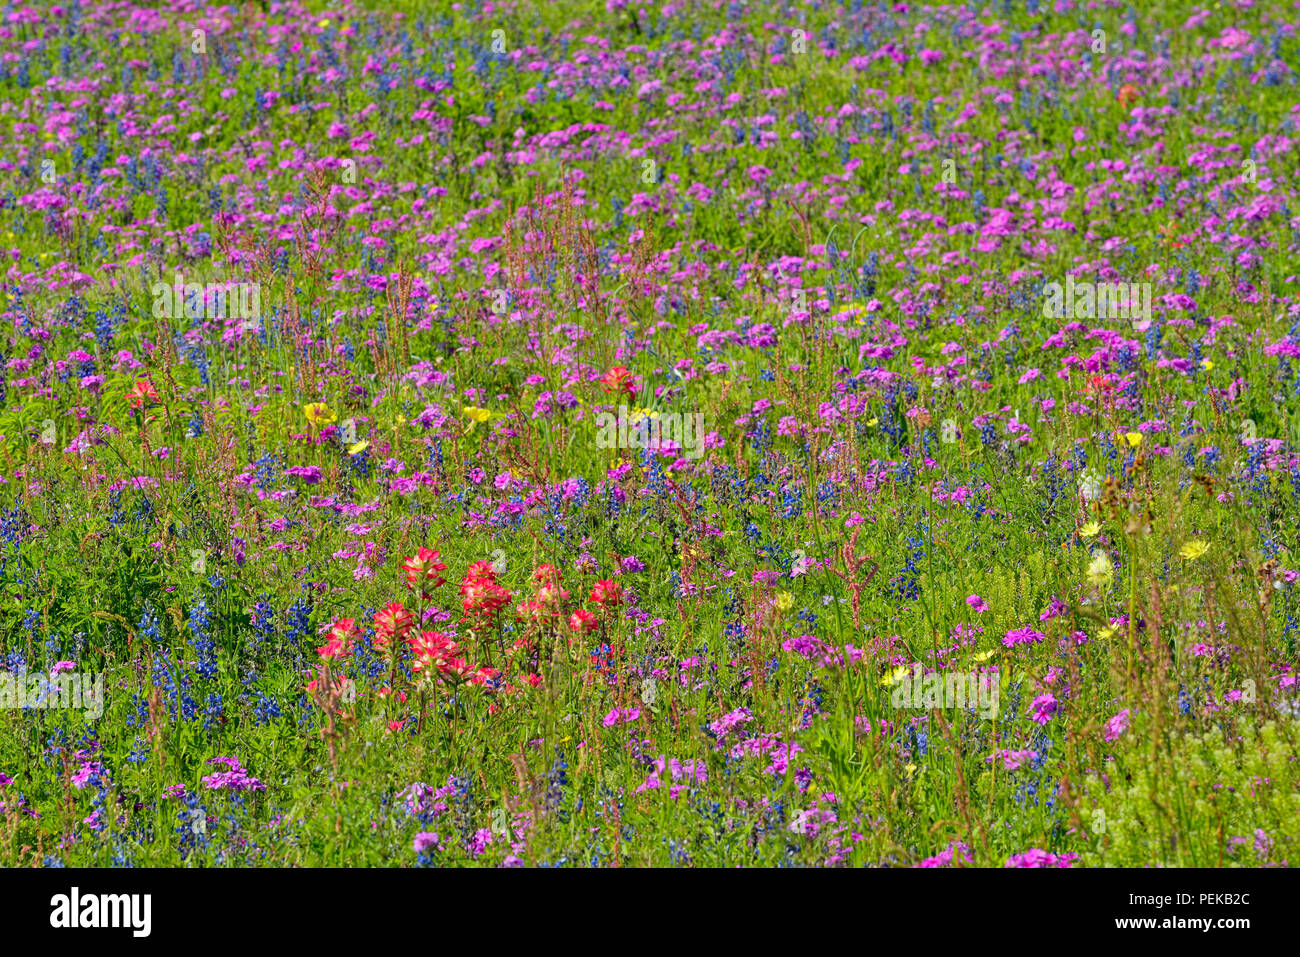 A field with wildflowers- phlox and Texas bluebonnet (Lupinus subcarnosus), FM 2504 near Somerset, Texas, USA Stock Photo